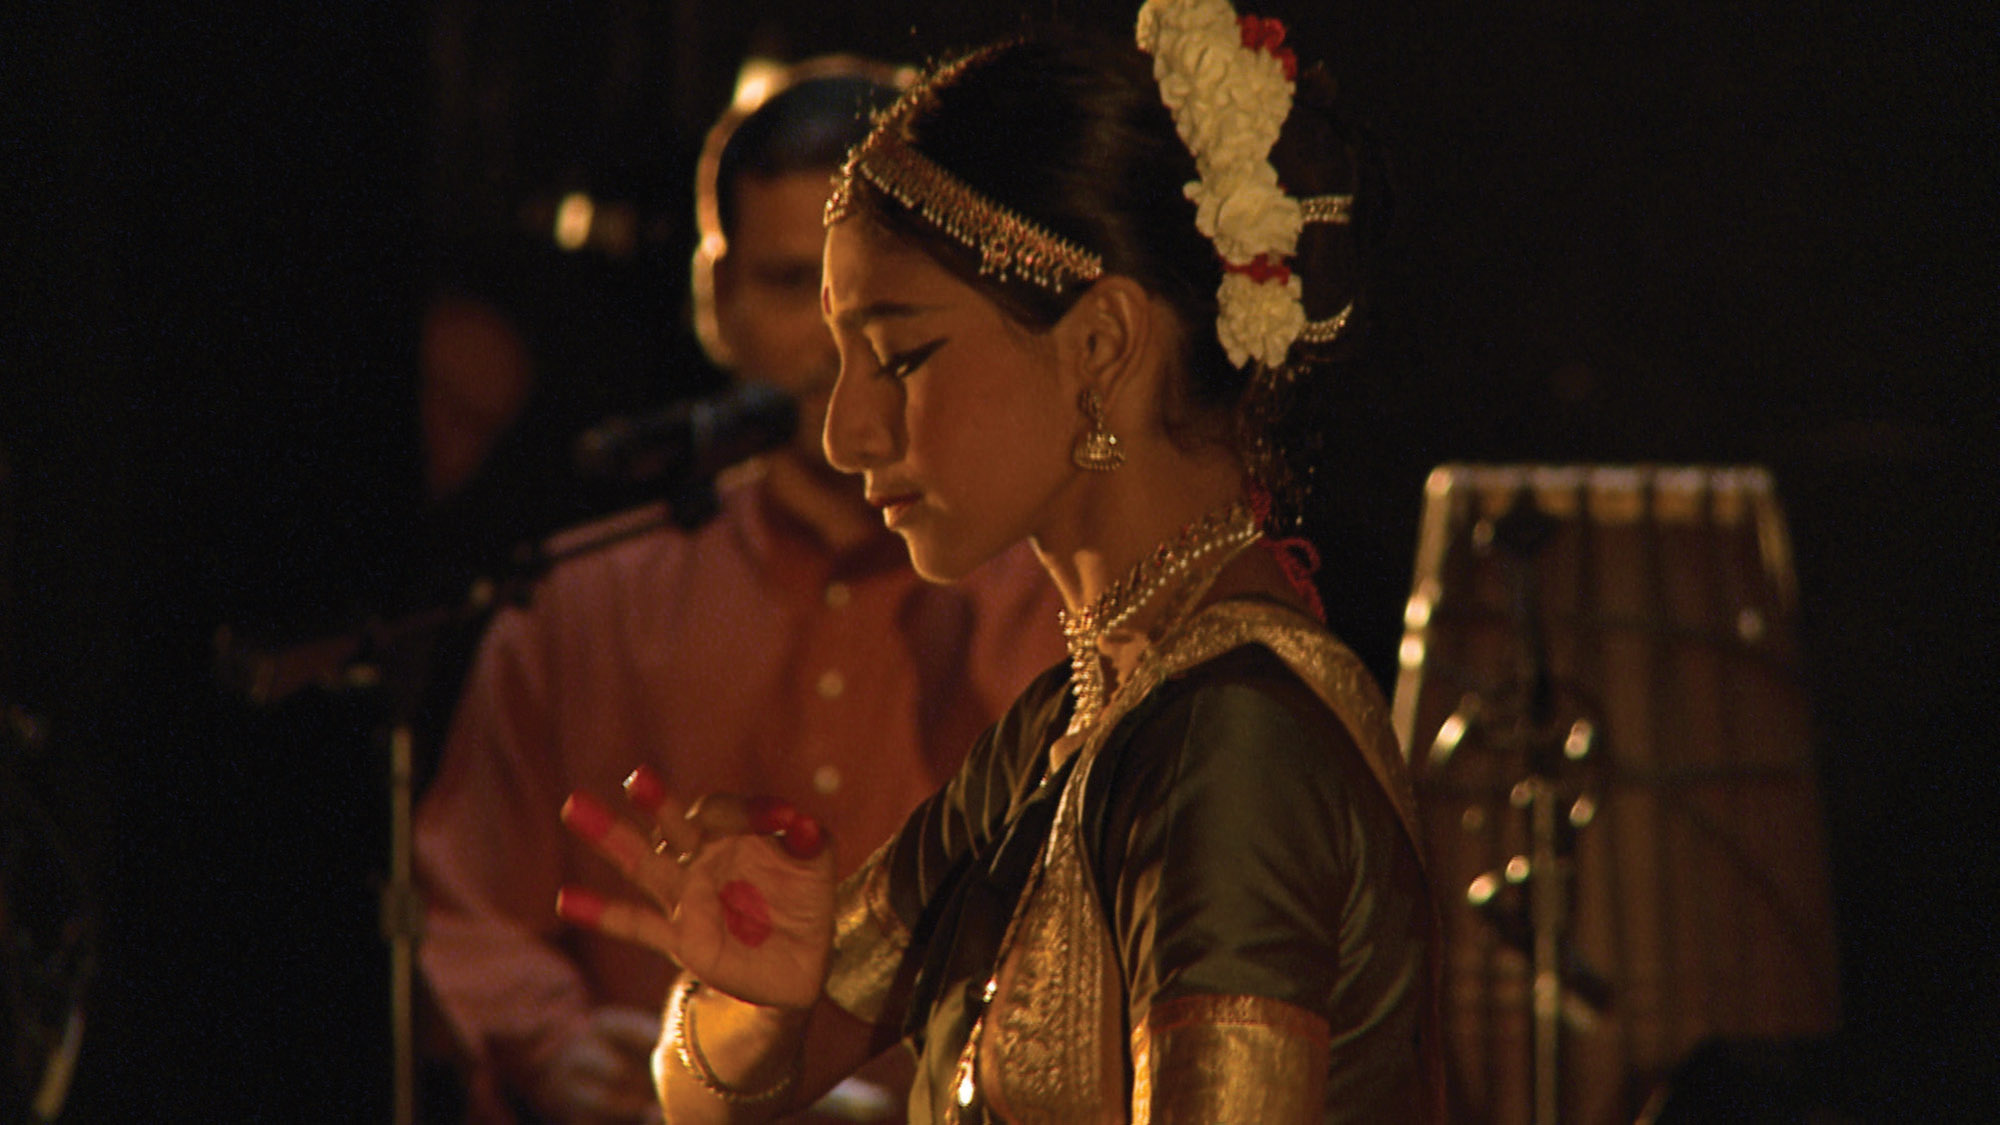 The profile of Indian woman dressed in traditional dress with white flowers in her hair, in a pose, mid dance. 